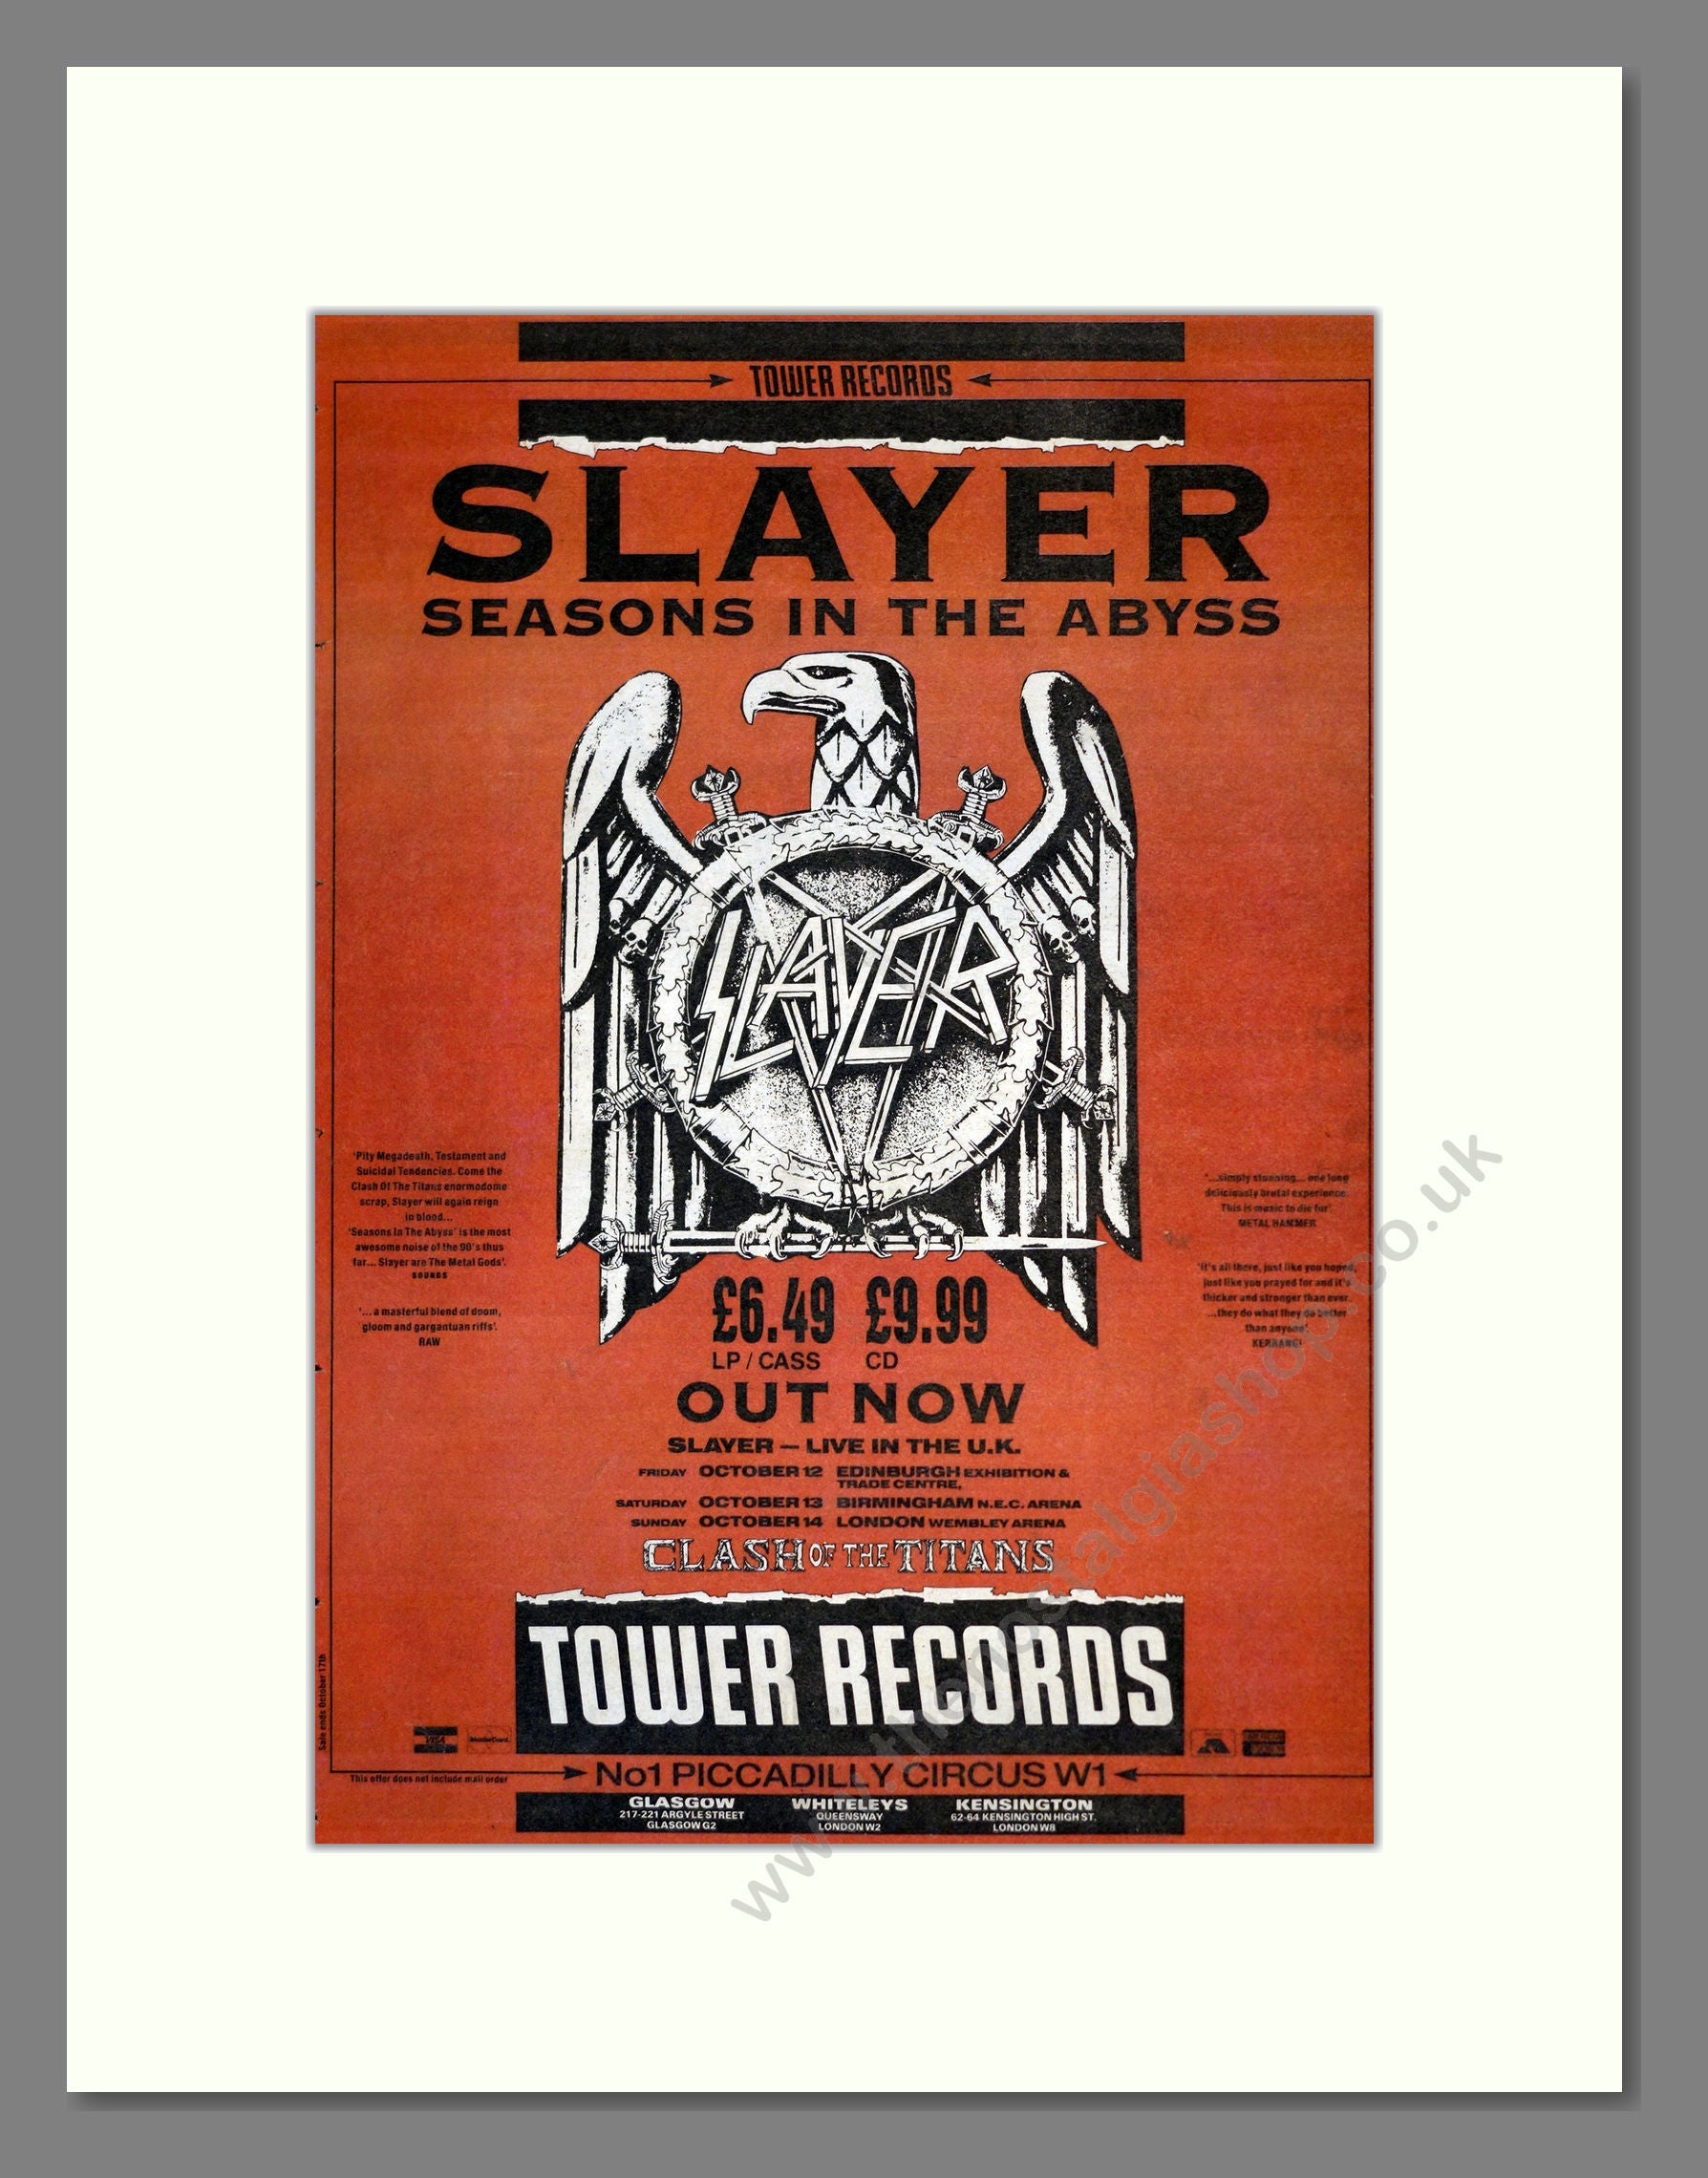 Slayer - Seasons In The Abyss. Vintage Advert 1990 (ref AD17868)